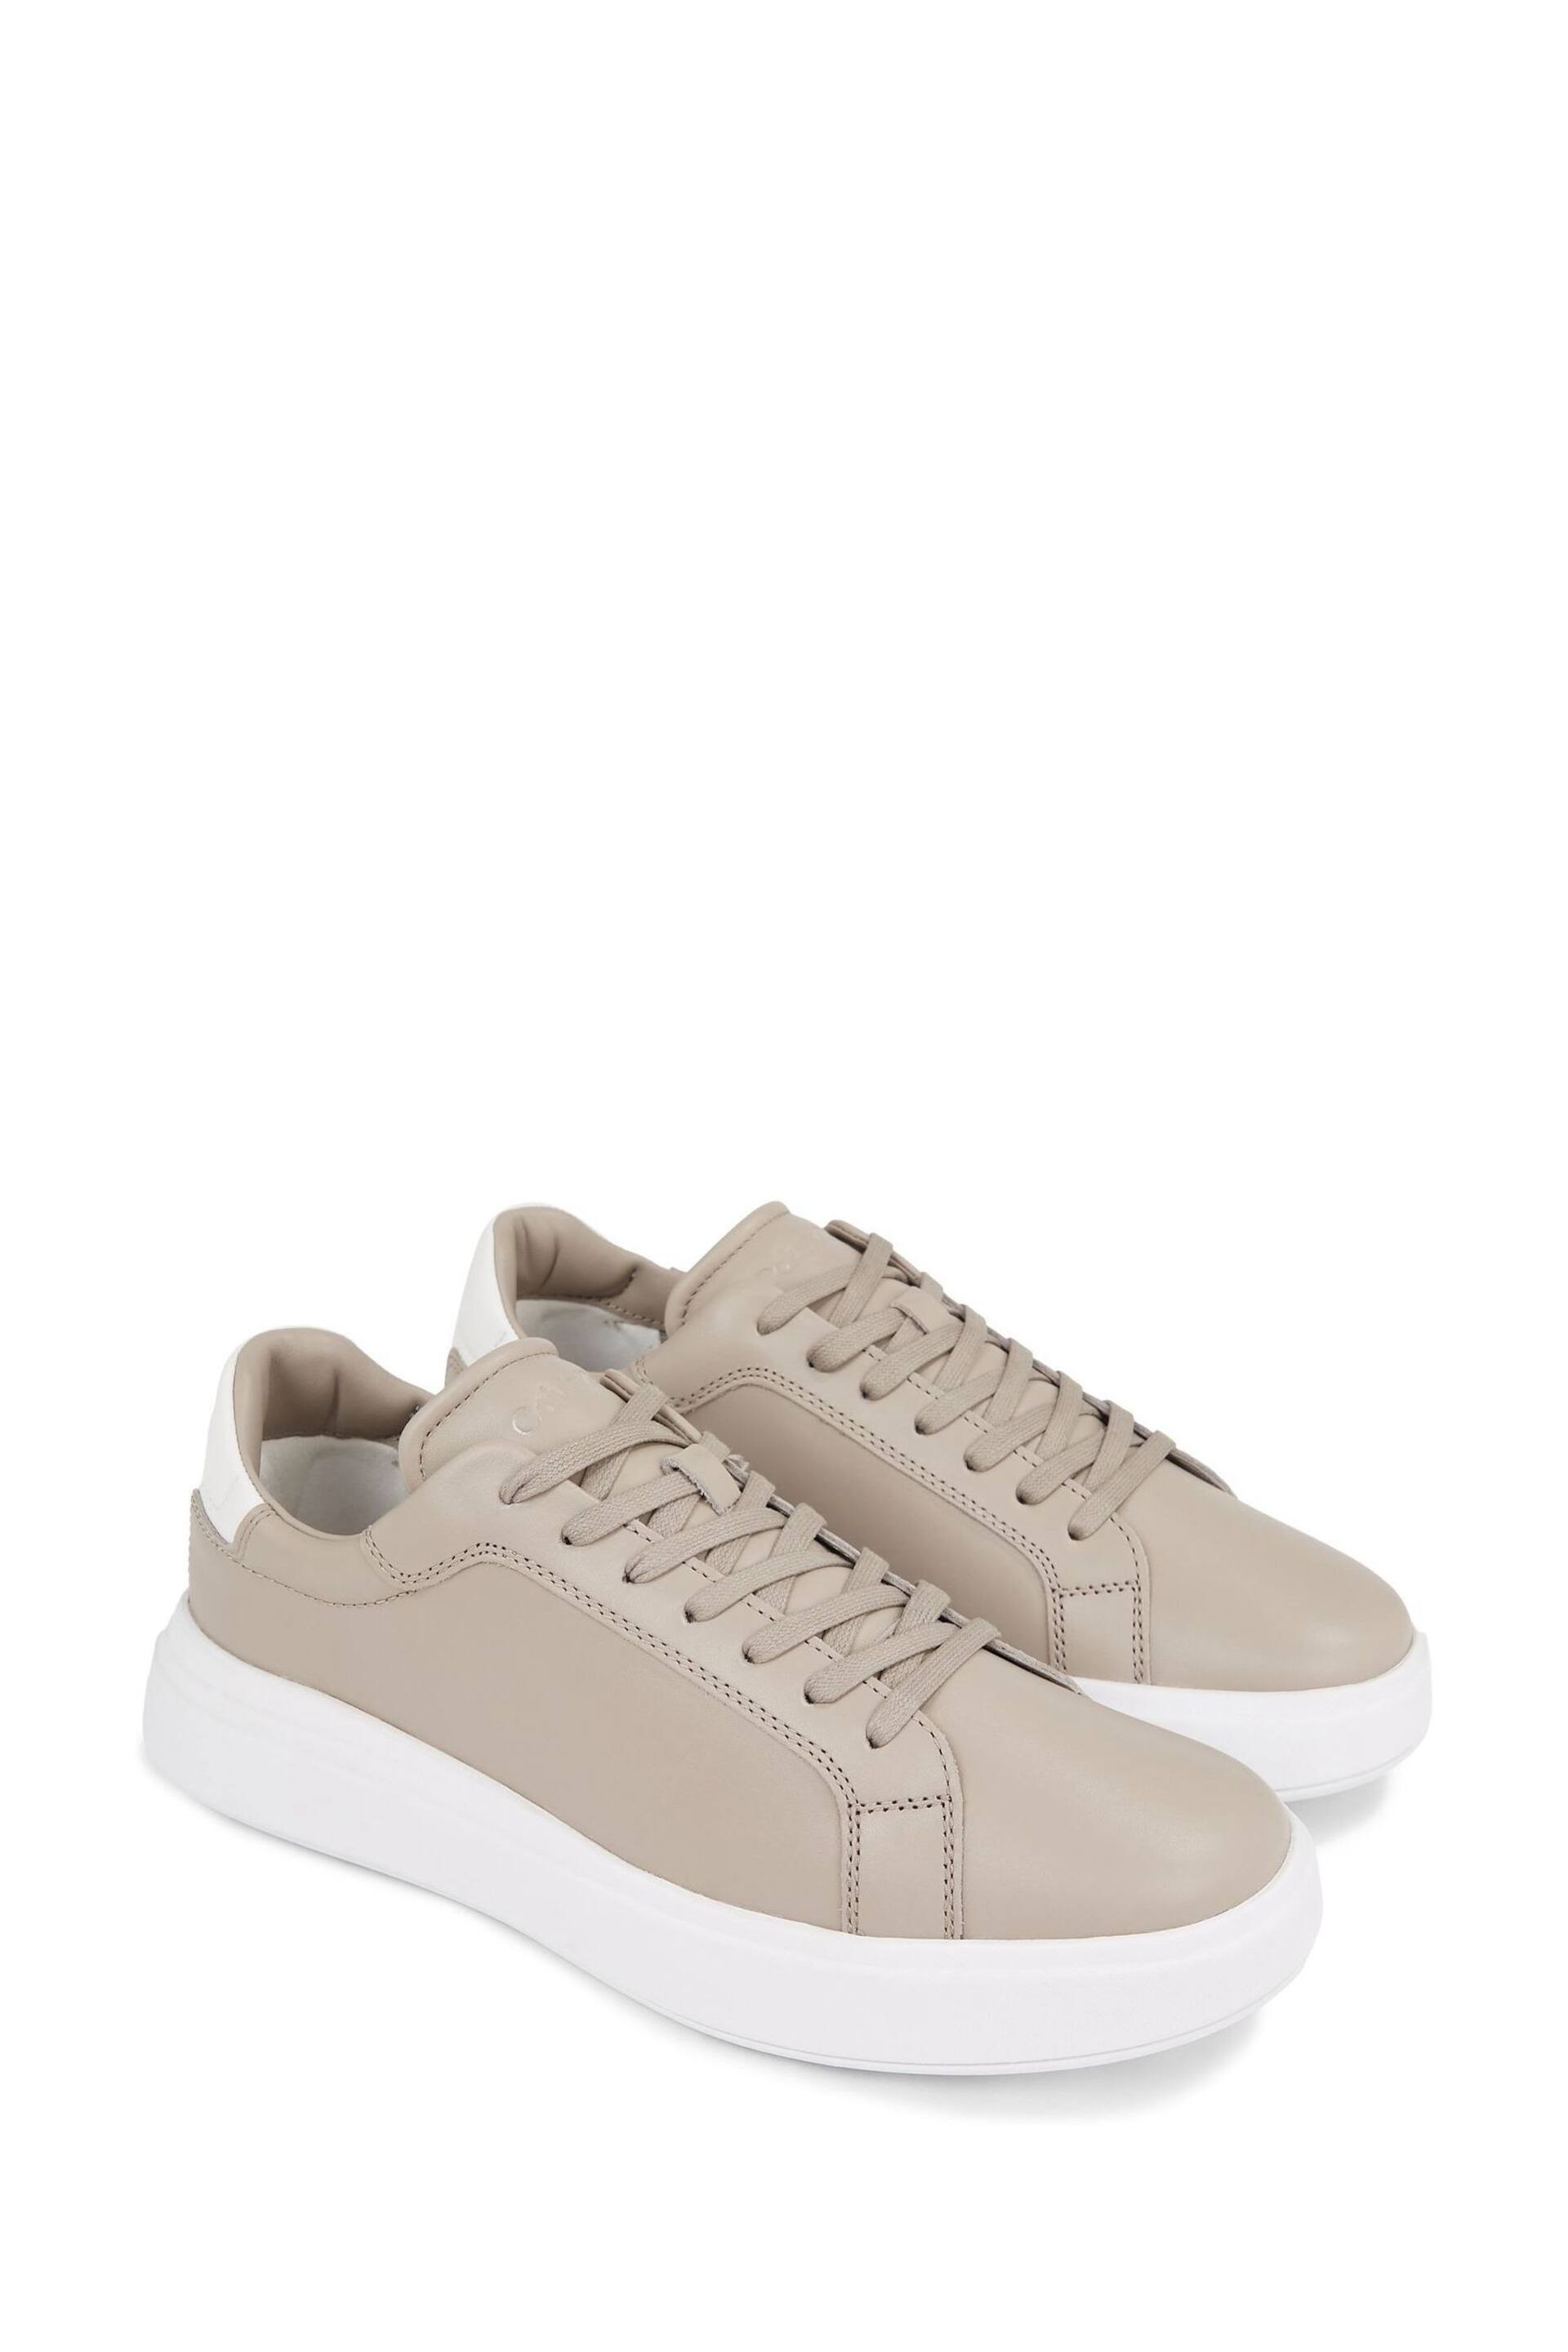 Calvin Klein Nude Low Top Lace-Up Sneakers - Image 1 of 4